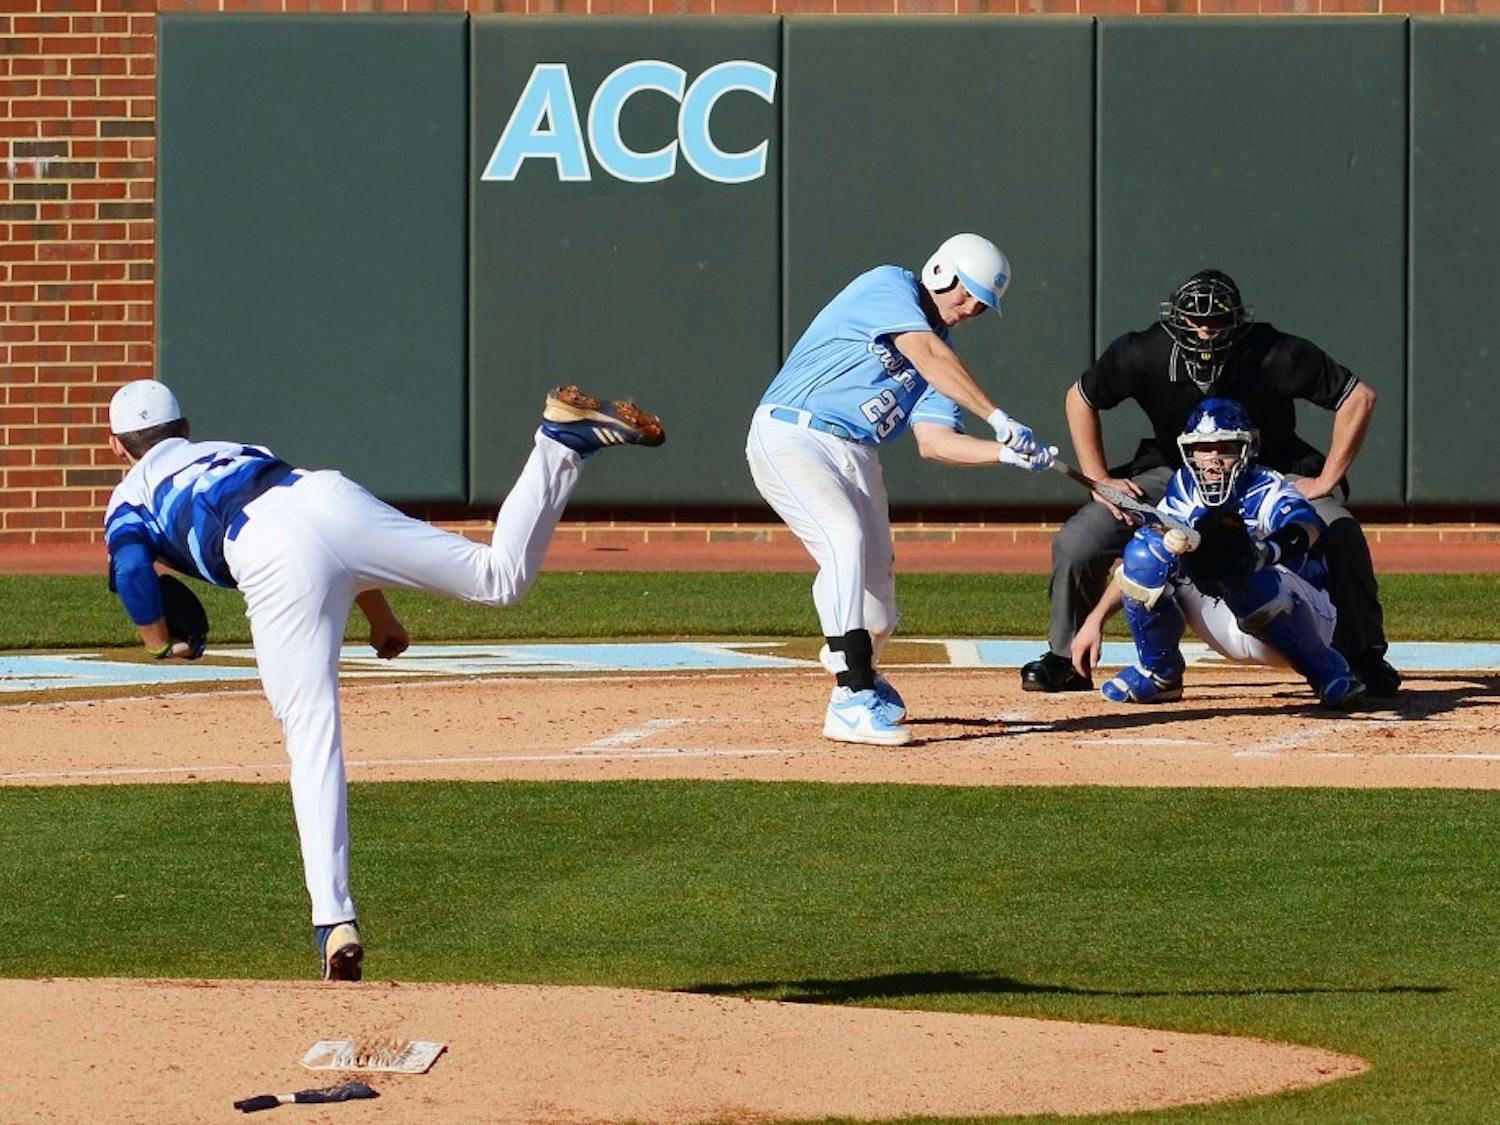 UNC first baseman Cody Stubbs (25) makes contact with the ball.